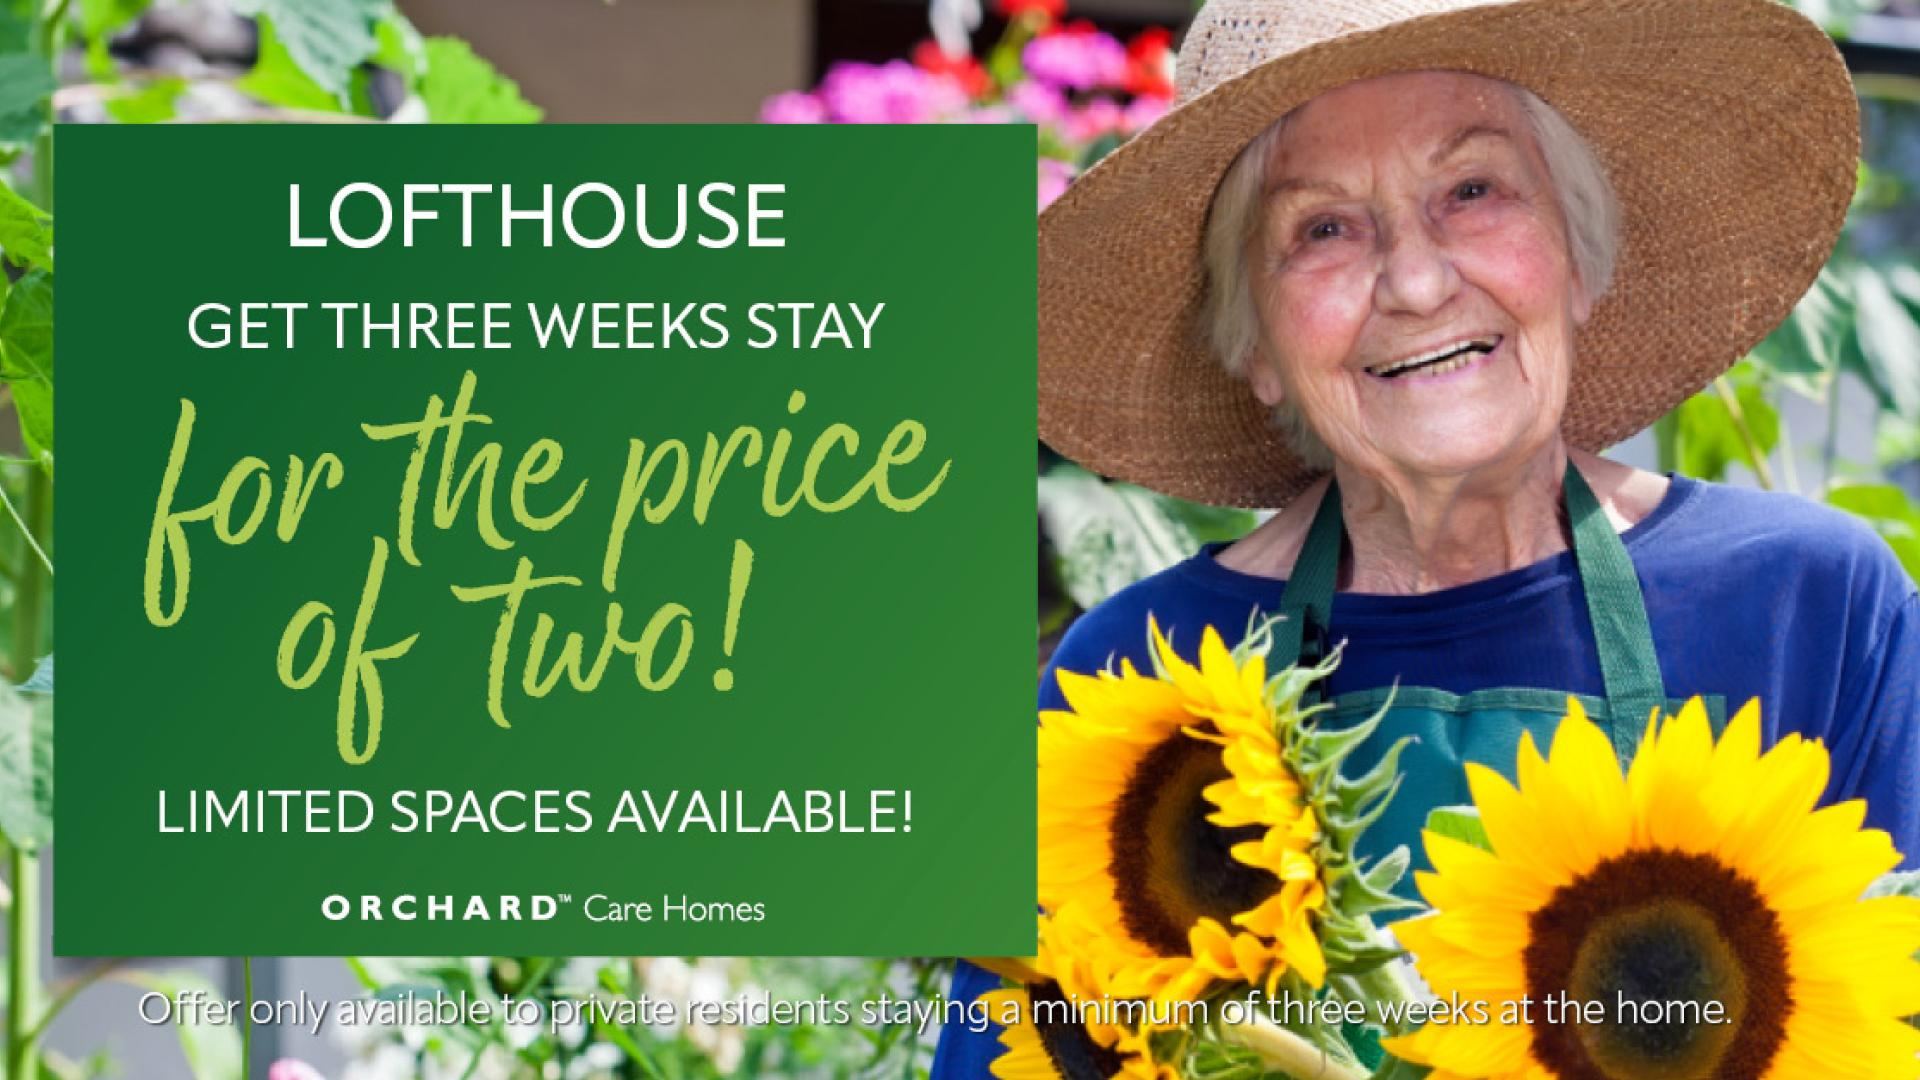 Get a 3 week stay for the price of 2 at Lofthouse Grange and Lodge Care Home